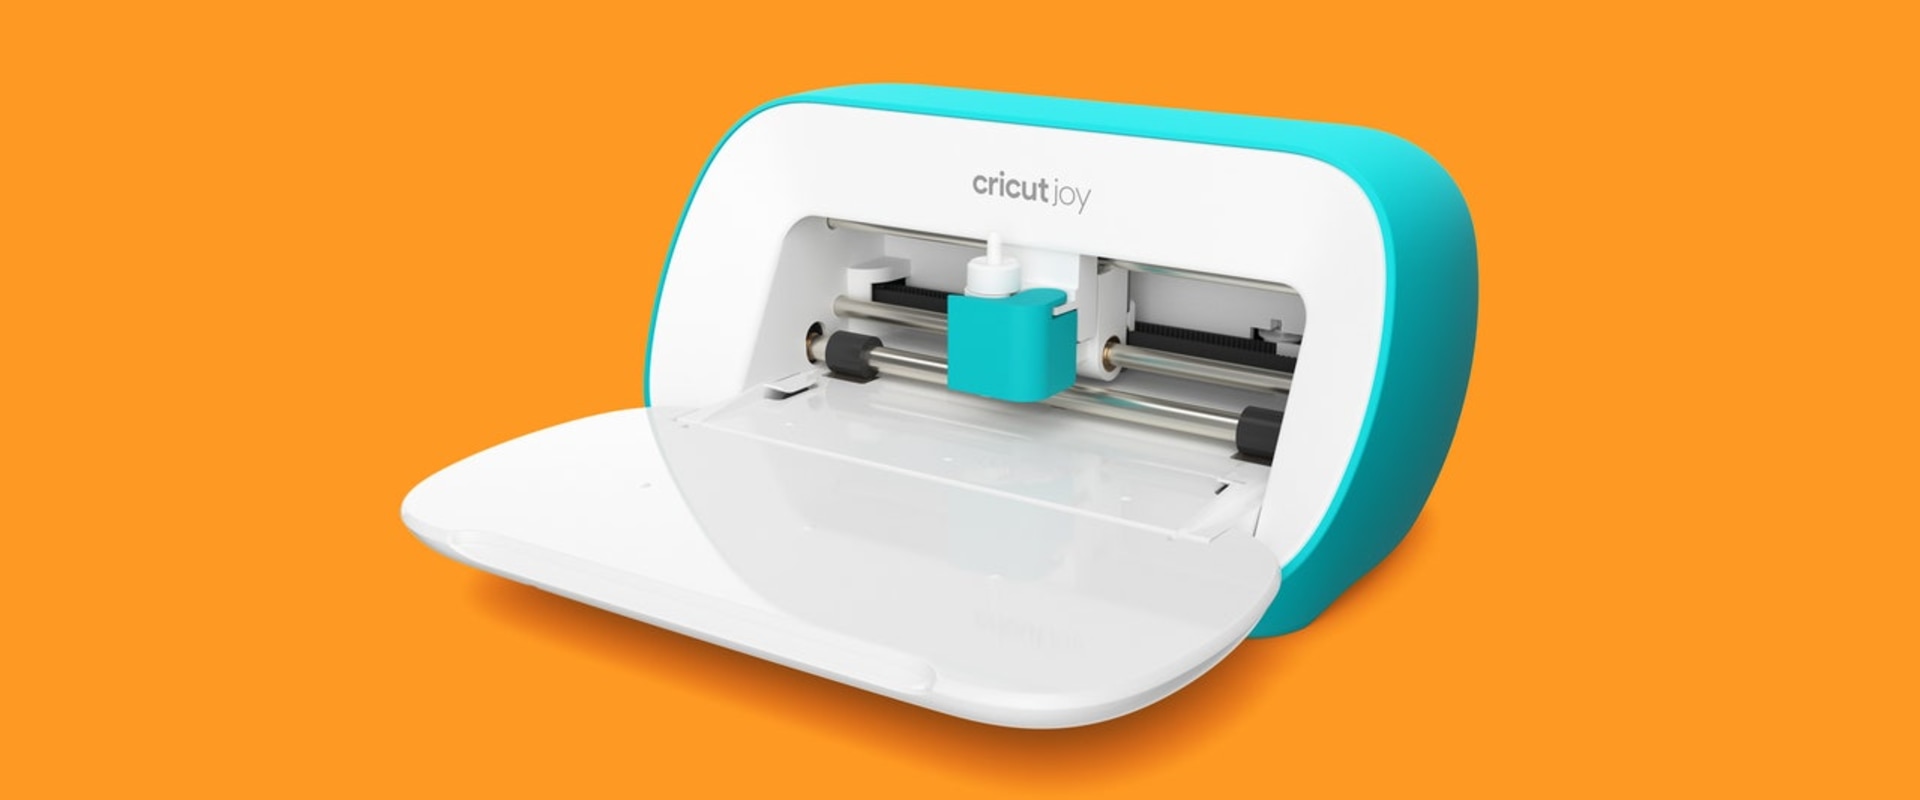 What do you need to operate a cricut?